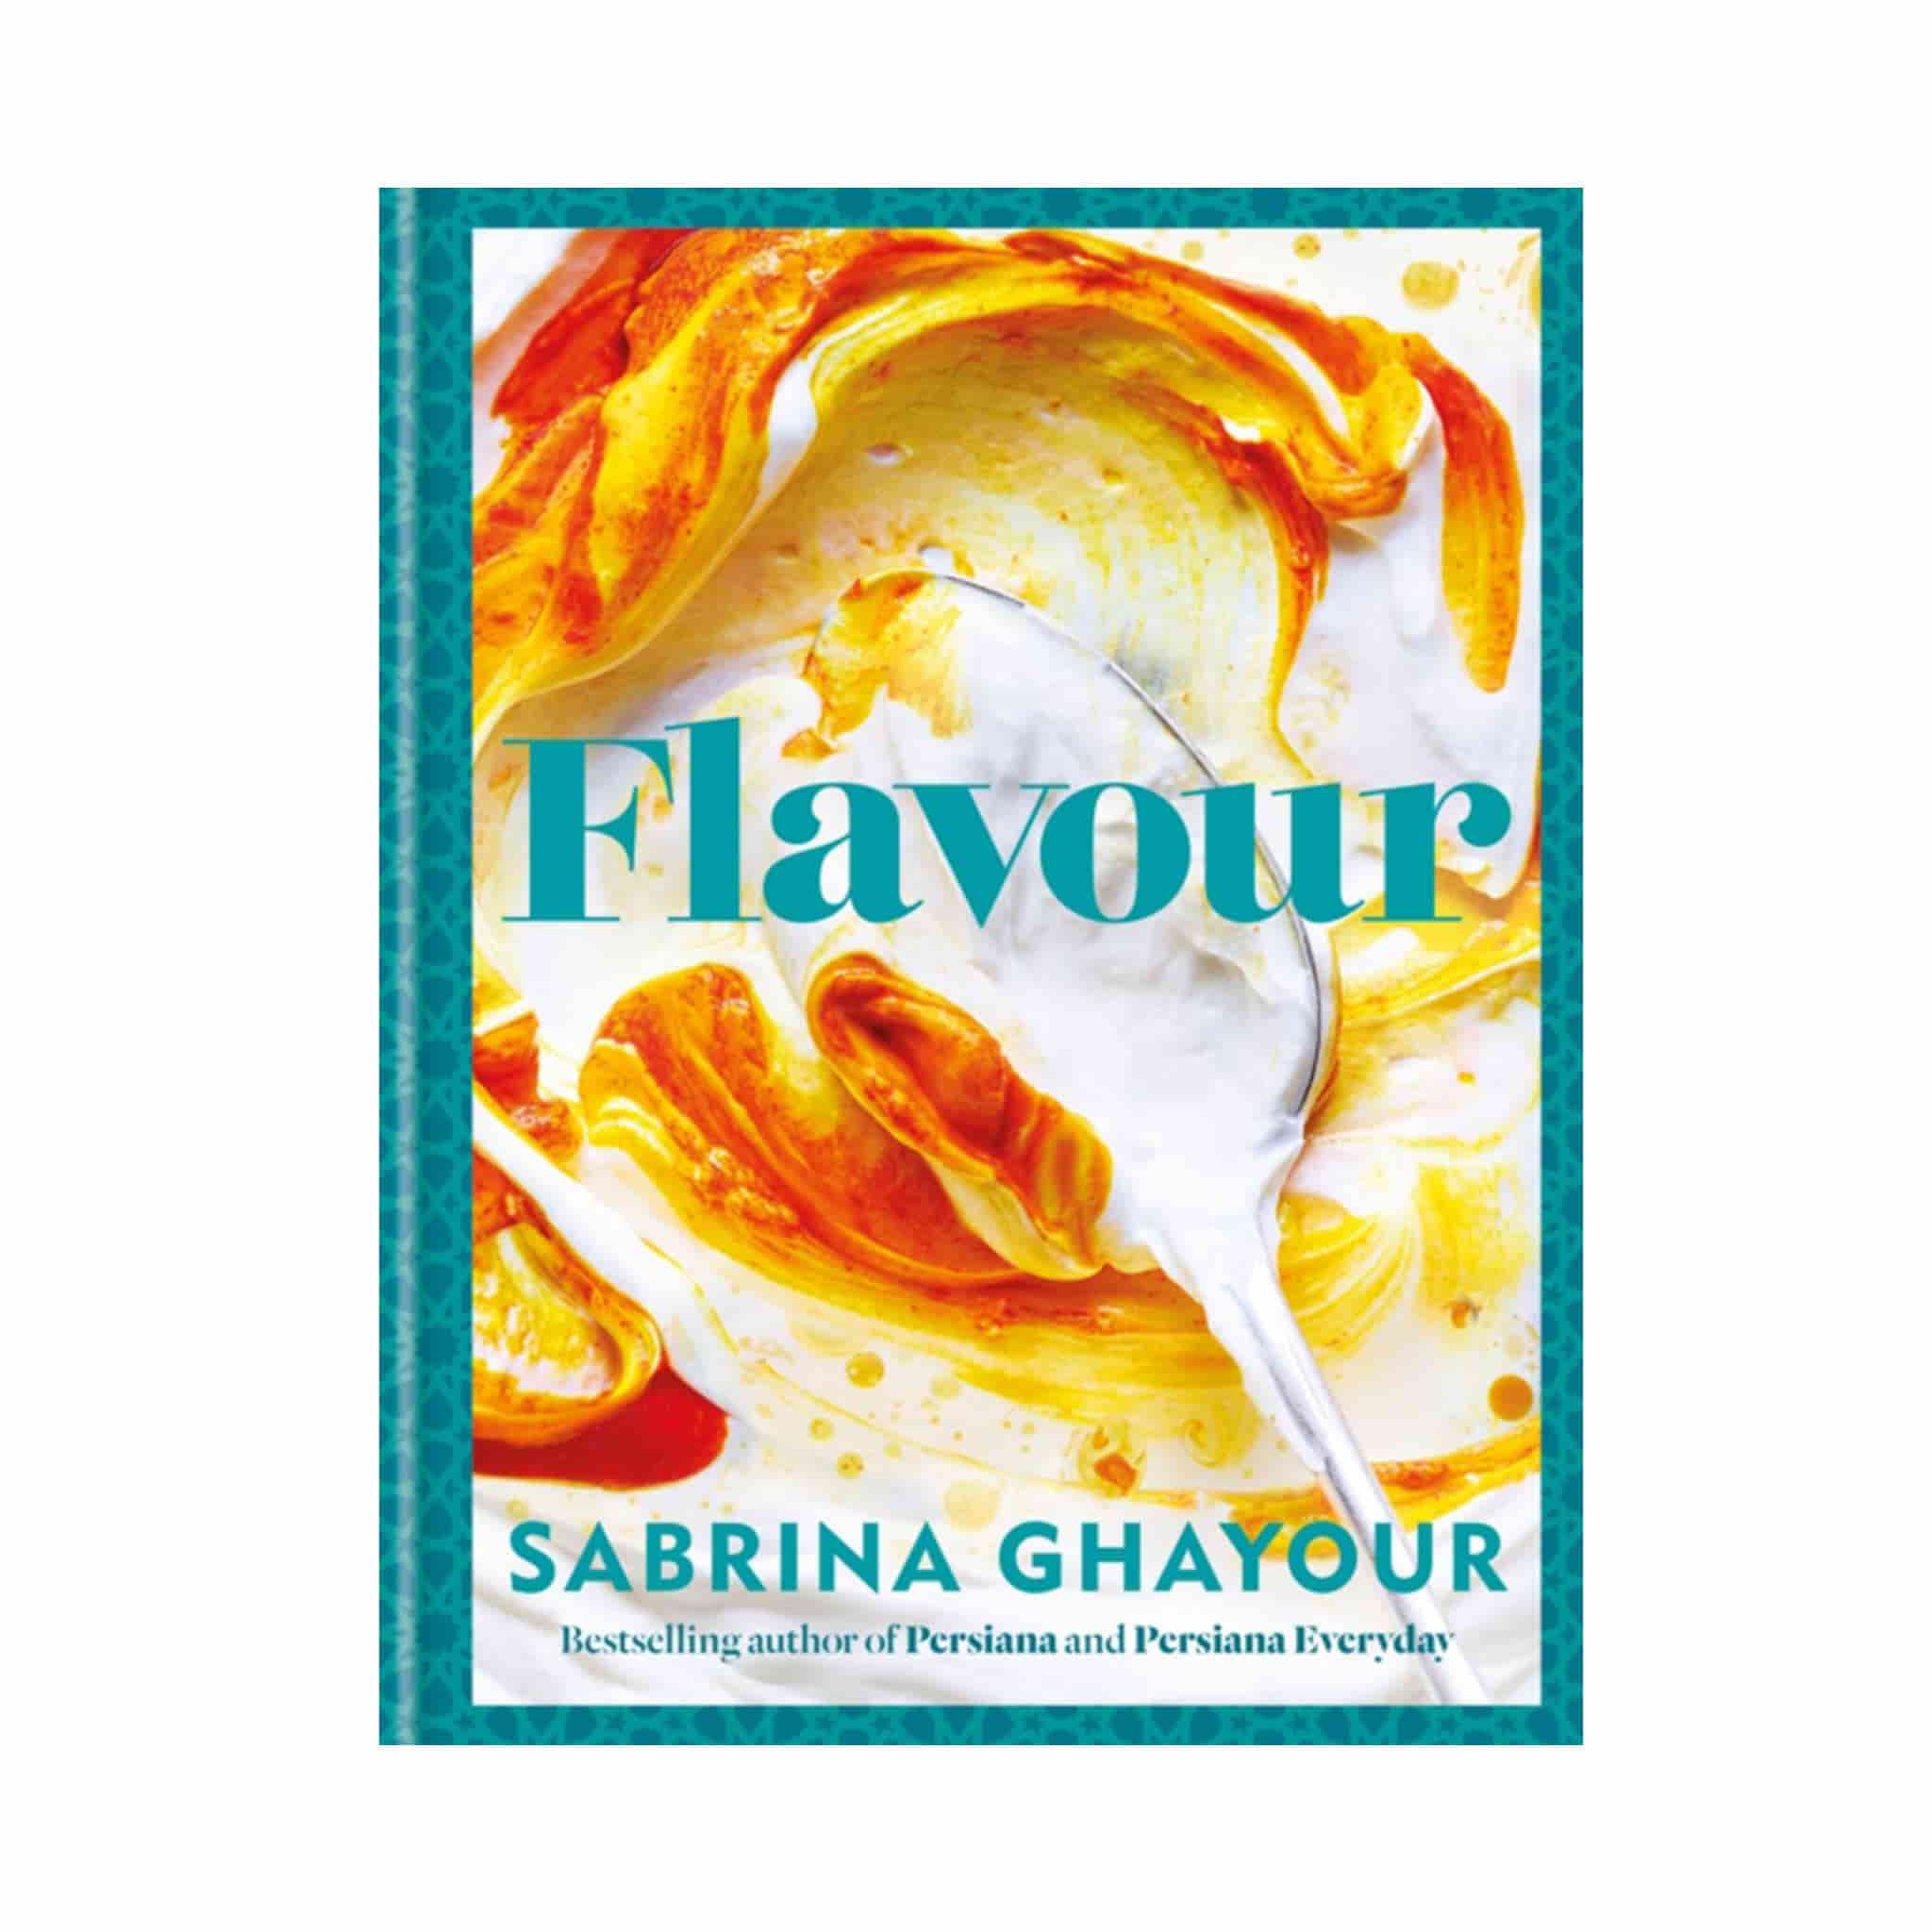 Flavour, by Sabrina Ghayour